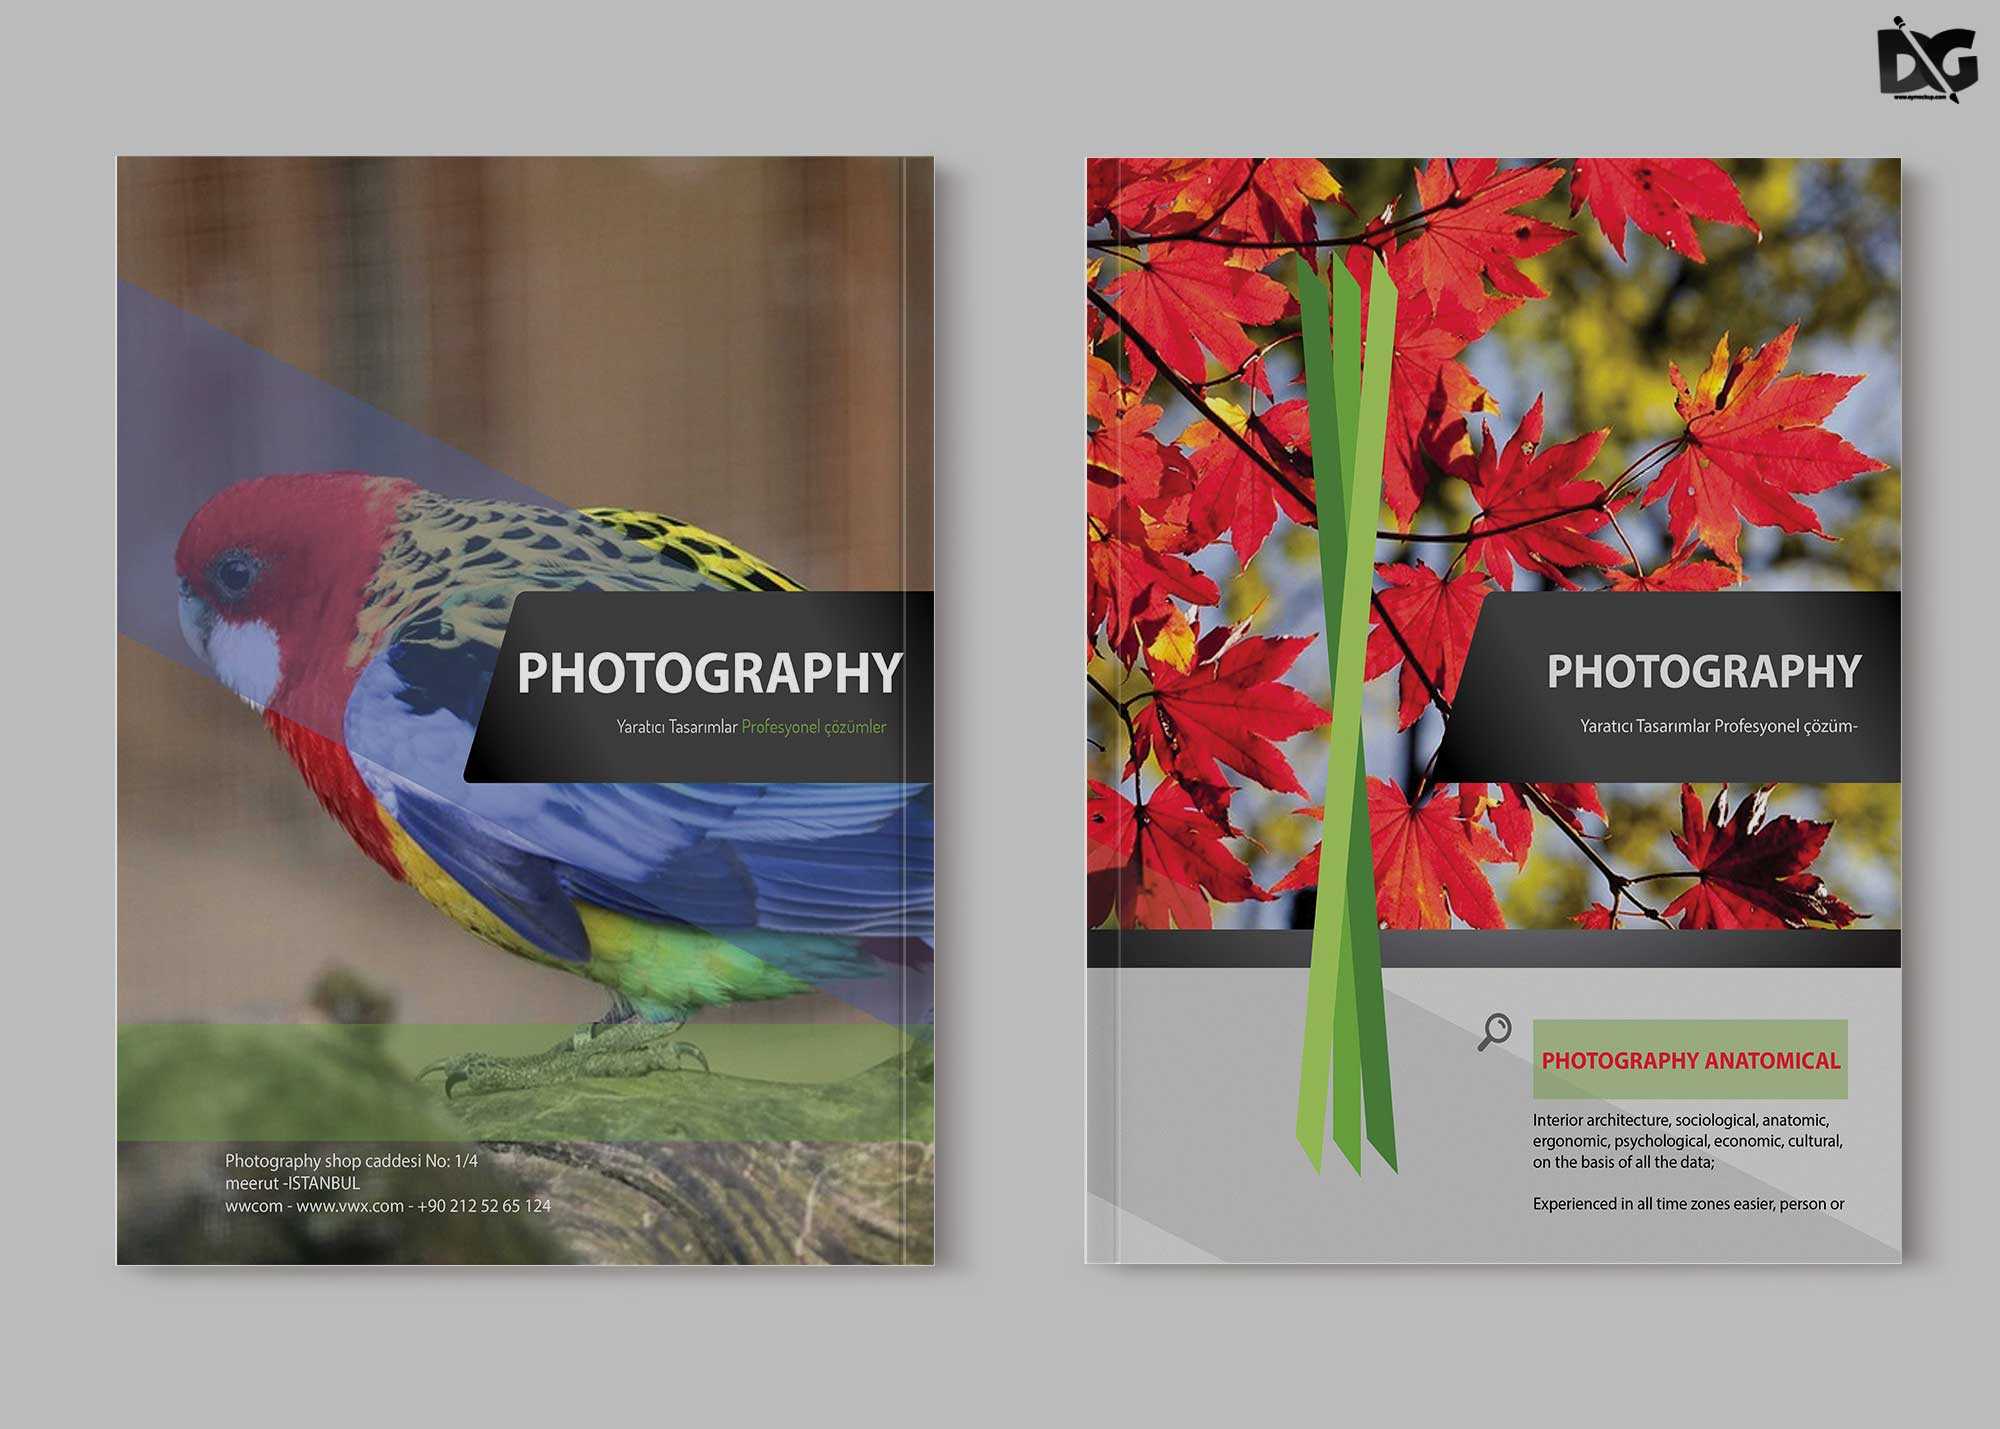 Free Zoo Photography Psd Brochure Template | Free Psd Mockup Throughout Zoo Brochure Template